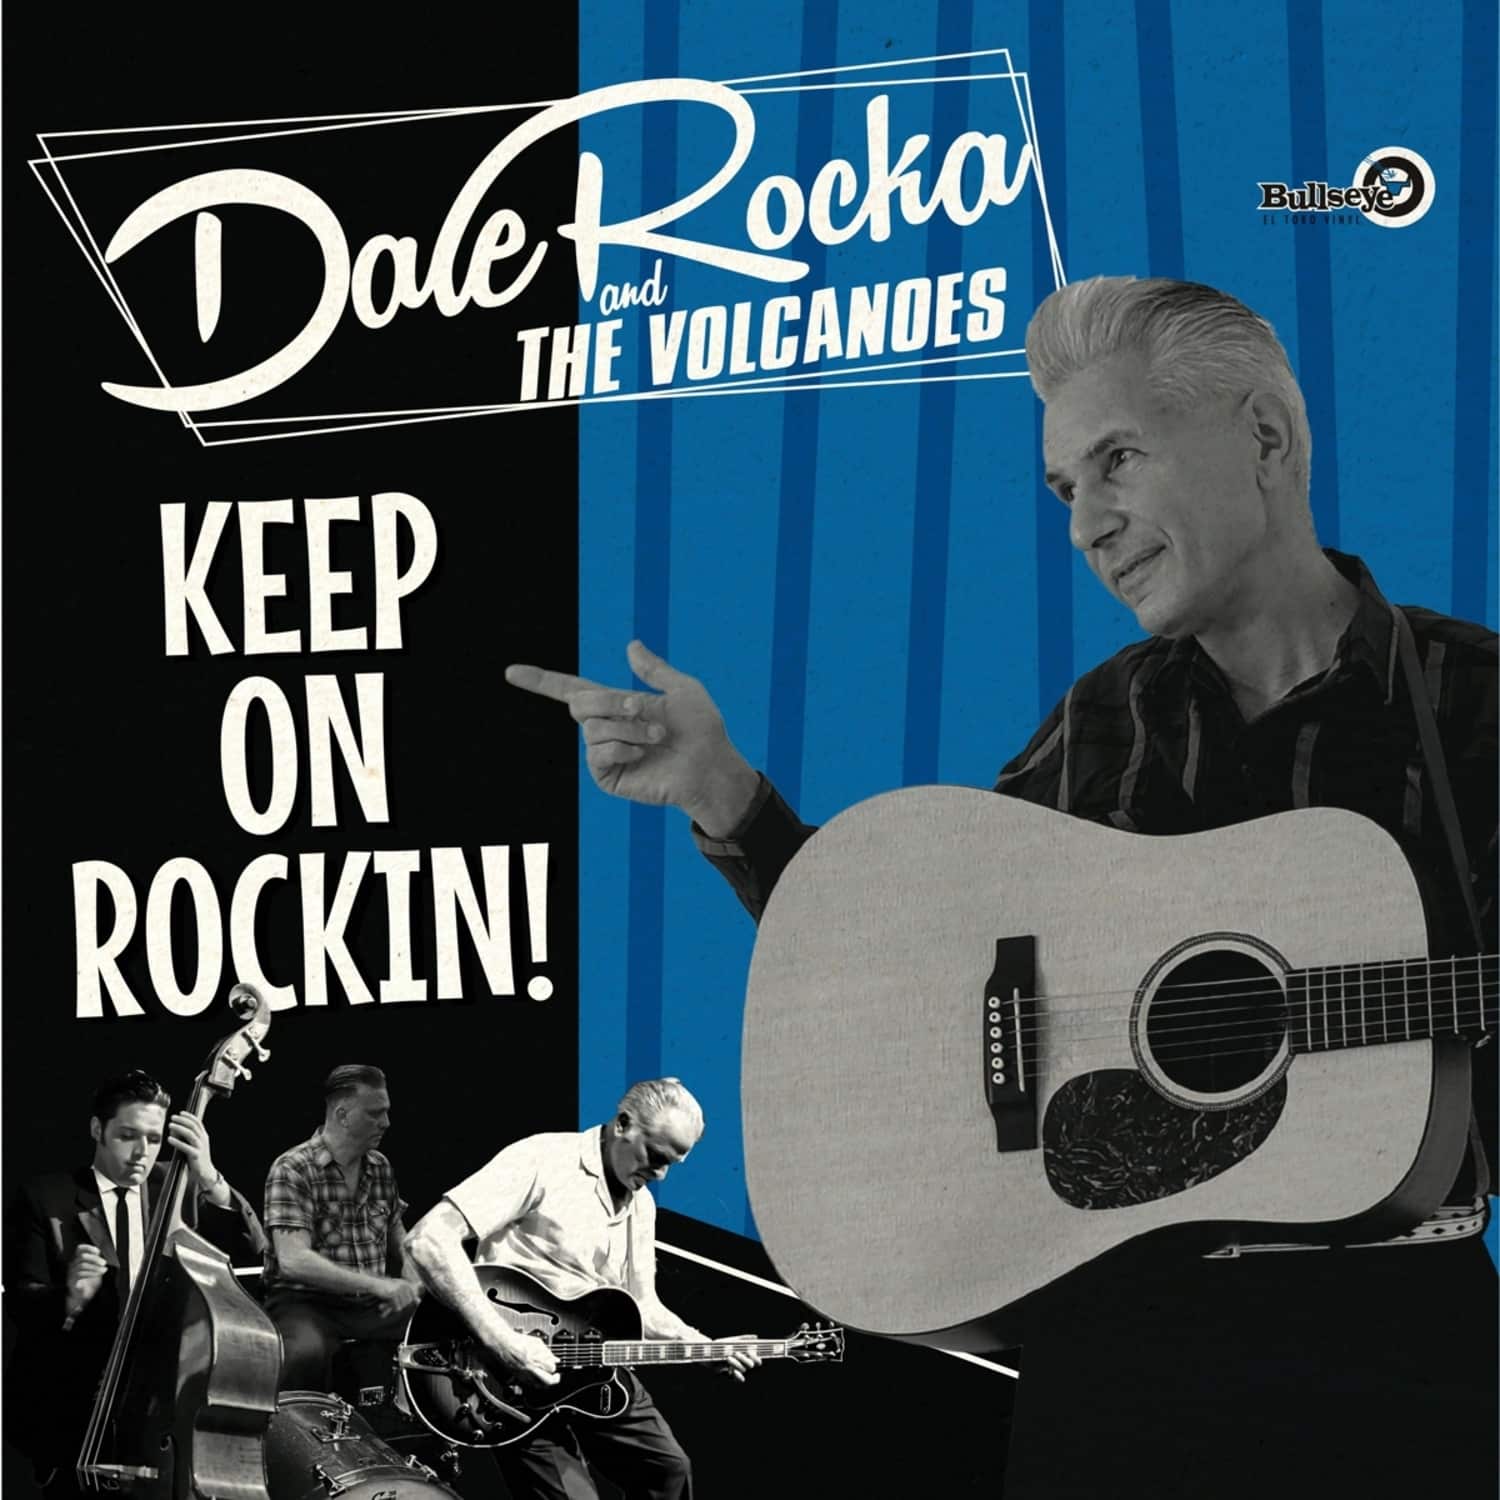 Dale And The Volcanoes Rocka - KEEP ON ROCKIN 